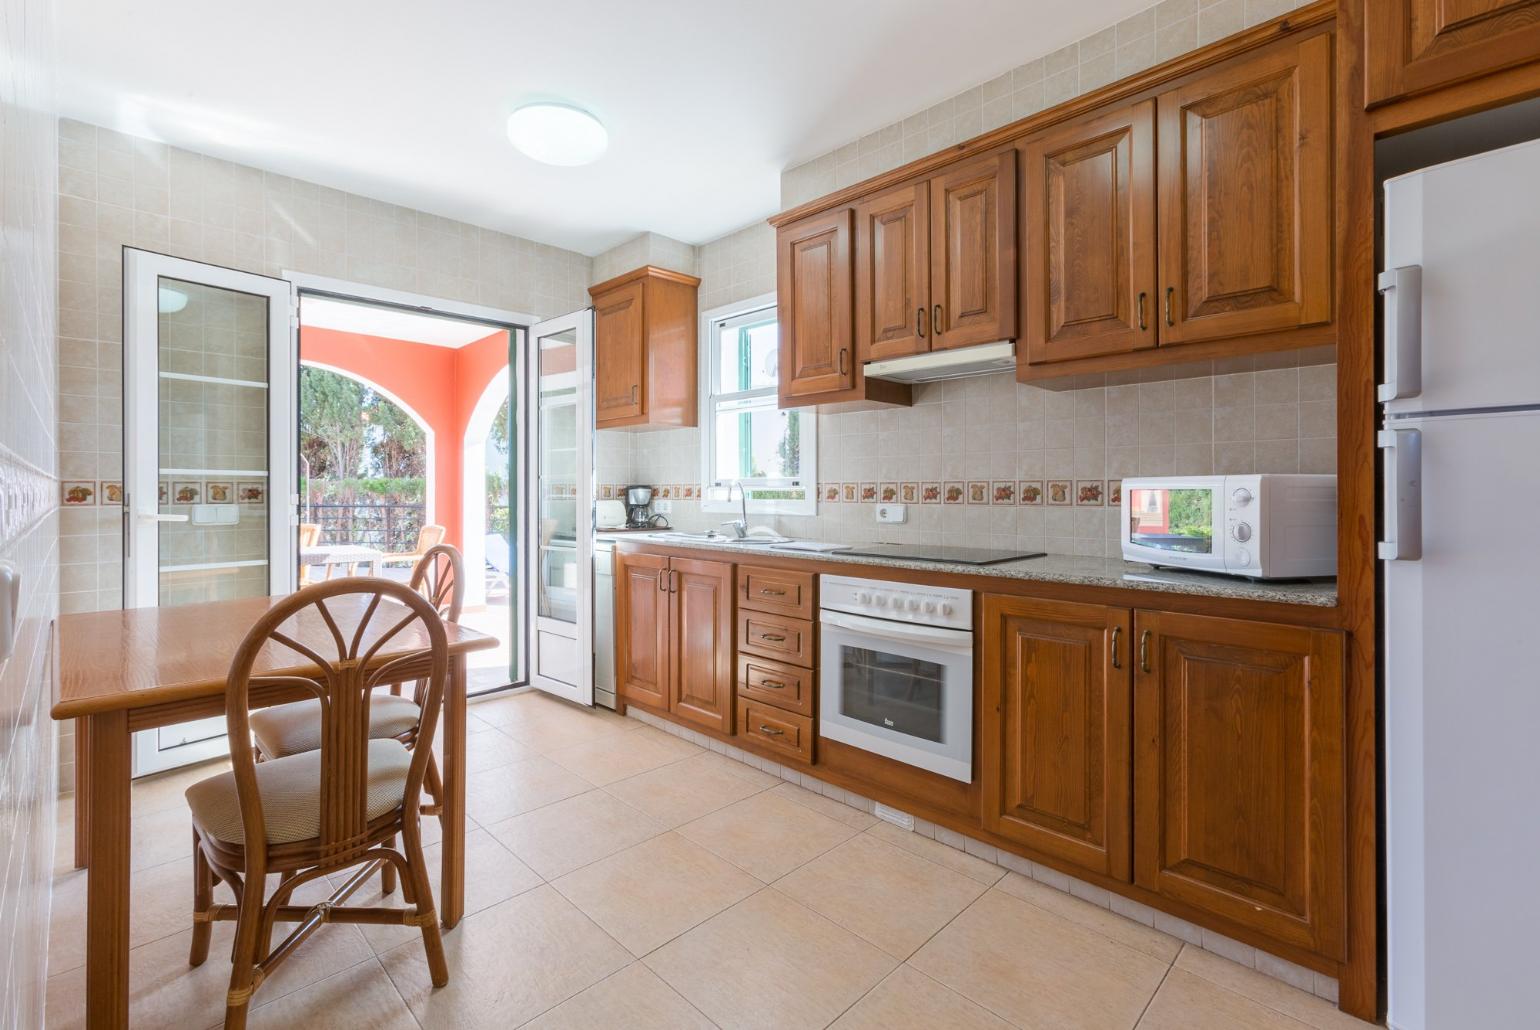 Equipped kitchen with dining area and terrace access